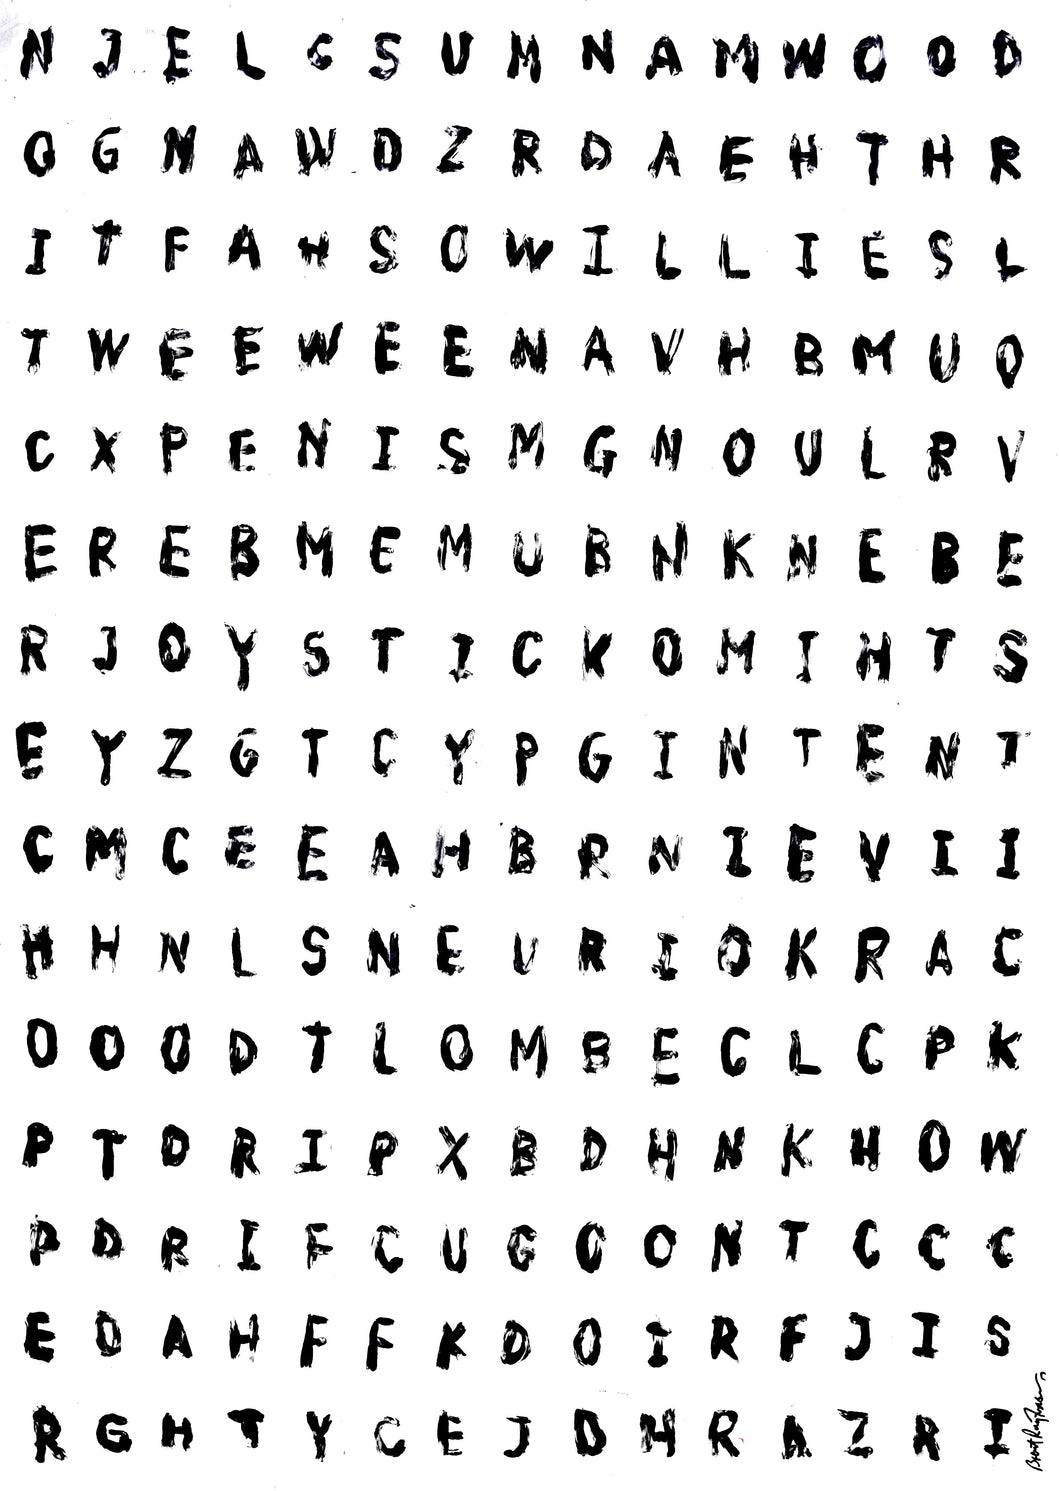 Slang Penis Word Search, 2017 - By Brent Ray Fraser